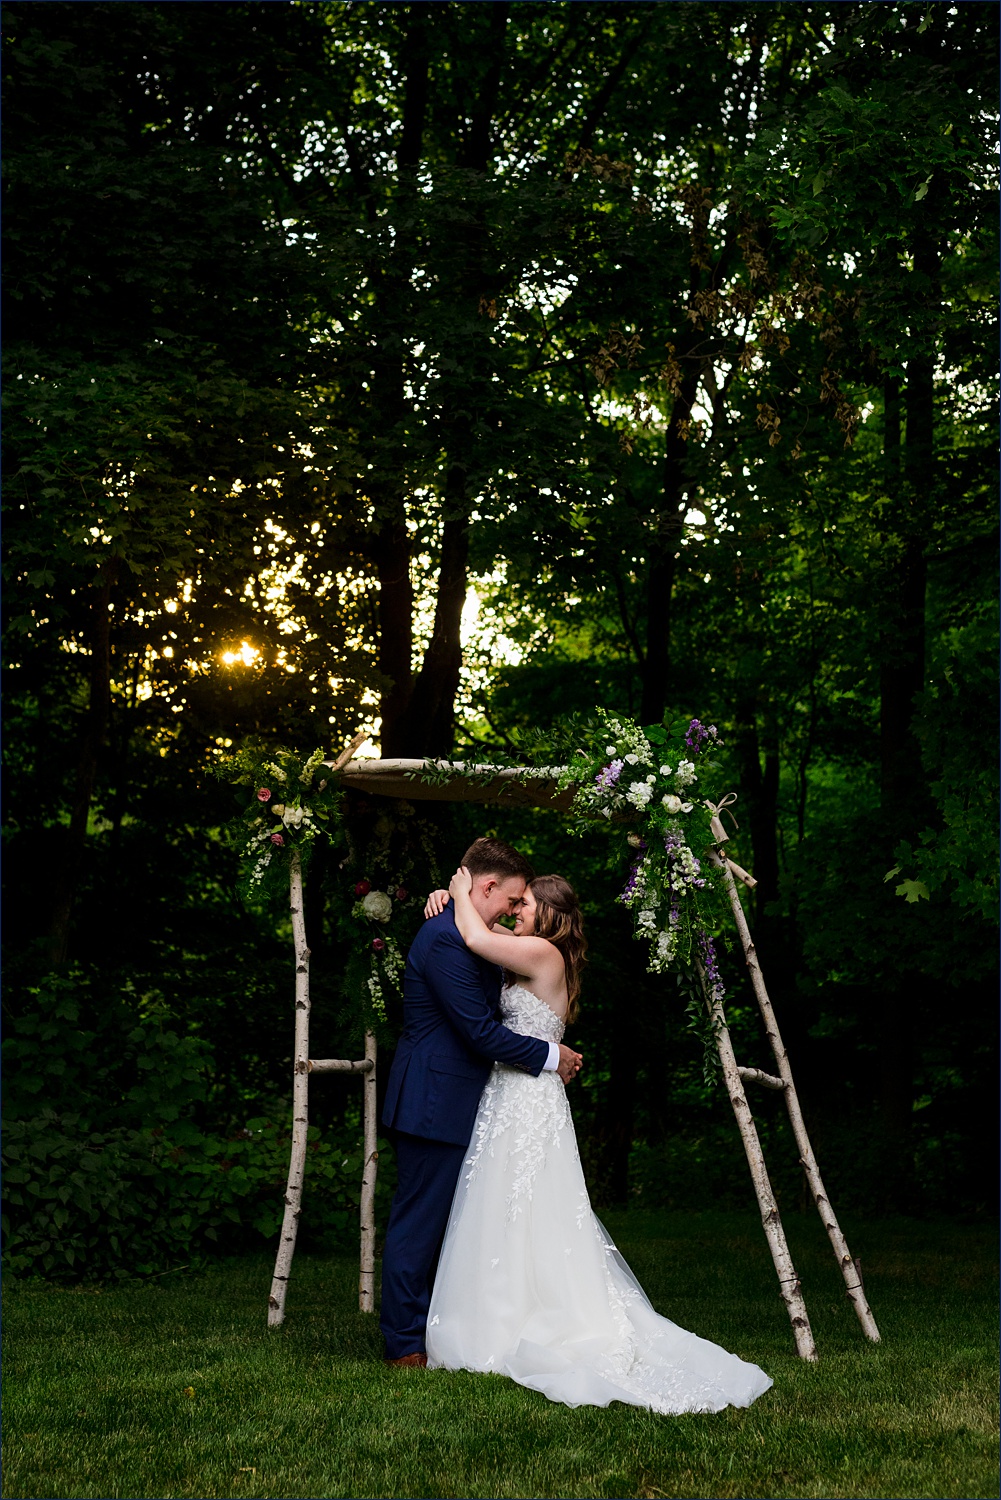 Holding one another close as the sun begins to set on the wedding day among the tall trees